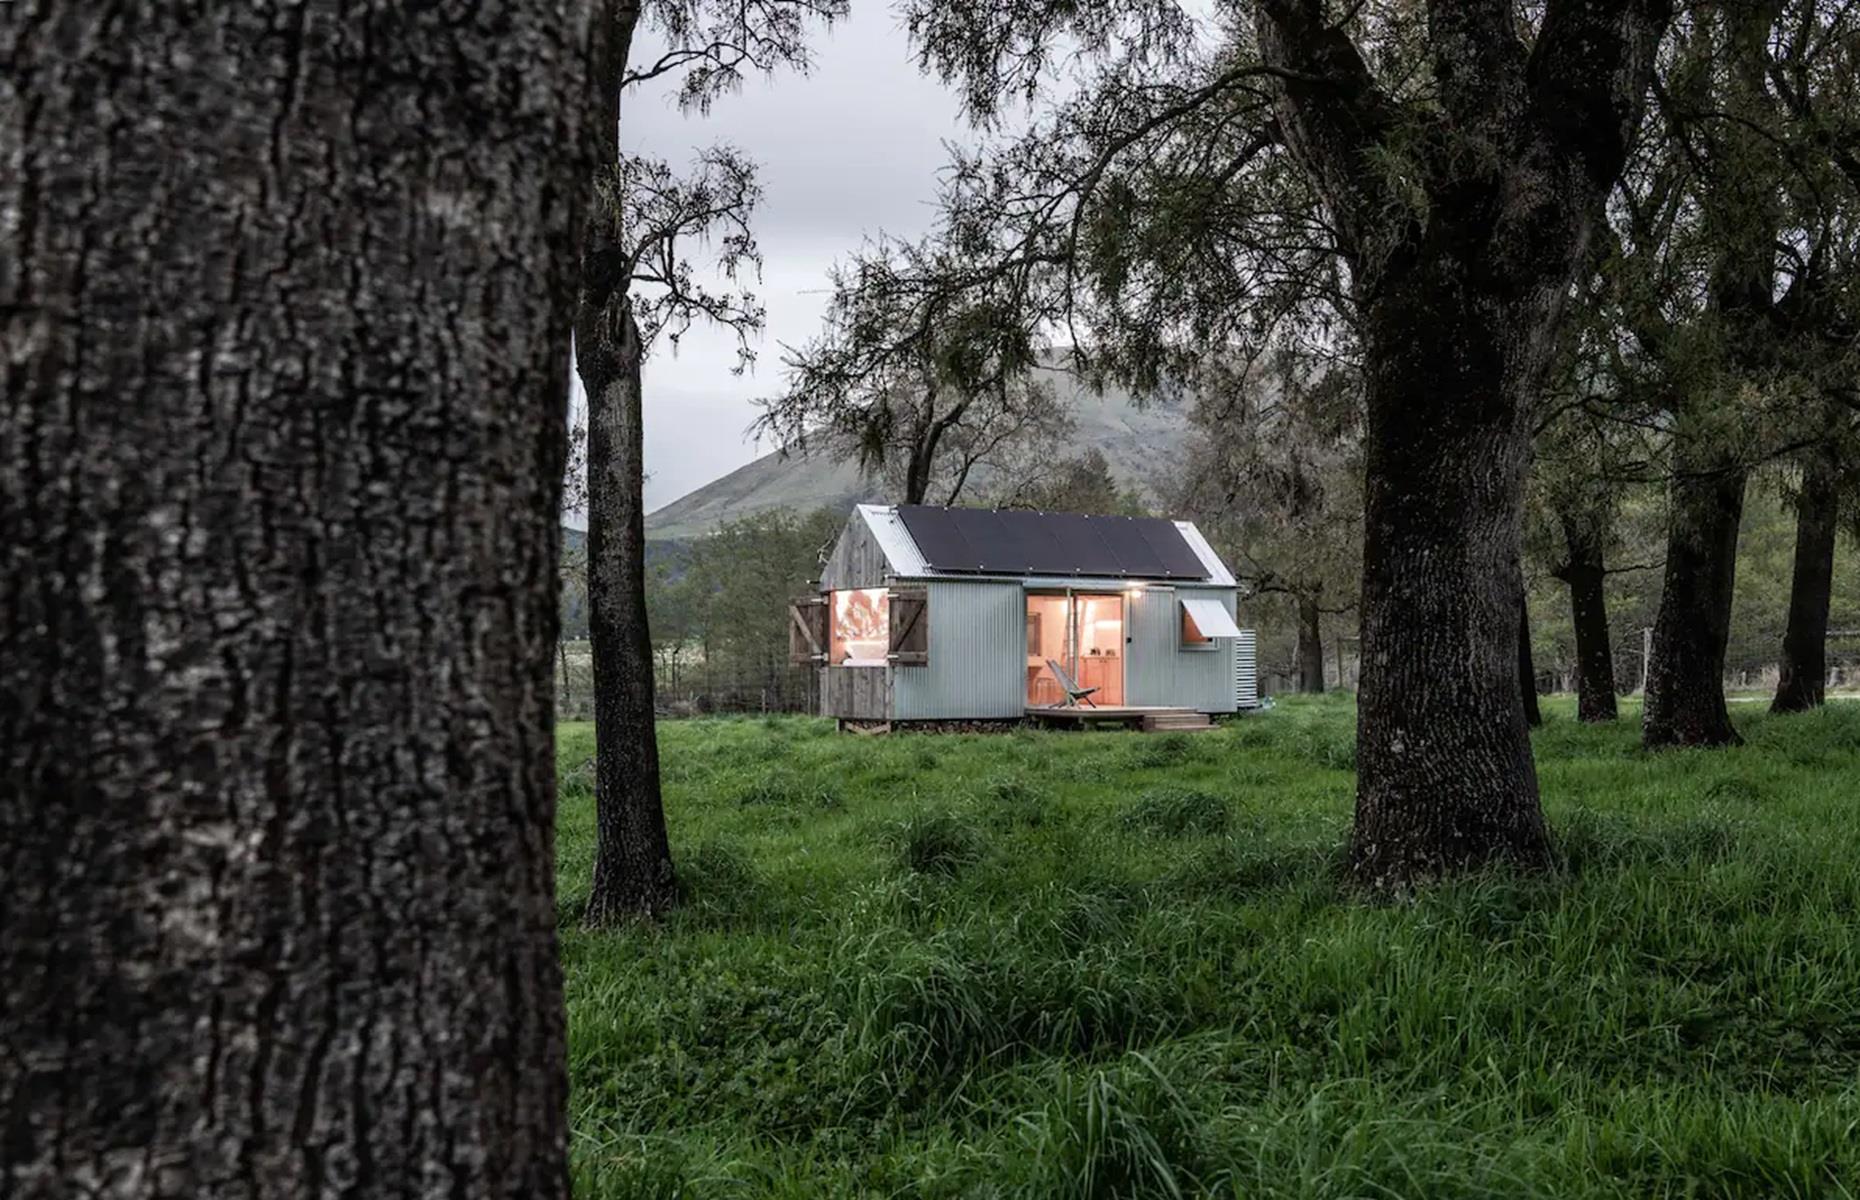 <p>This award-winning tiny home in Canterbury, New Zealand is 100% off-grid and just as beautiful. Designed by the team at <a href="https://www.studiowell.co.nz/">Studio Well Architecture</a>, the property incorporates locally sourced materials and simplistic design, but that doesn't stop it from being utterly dreamy.</p>